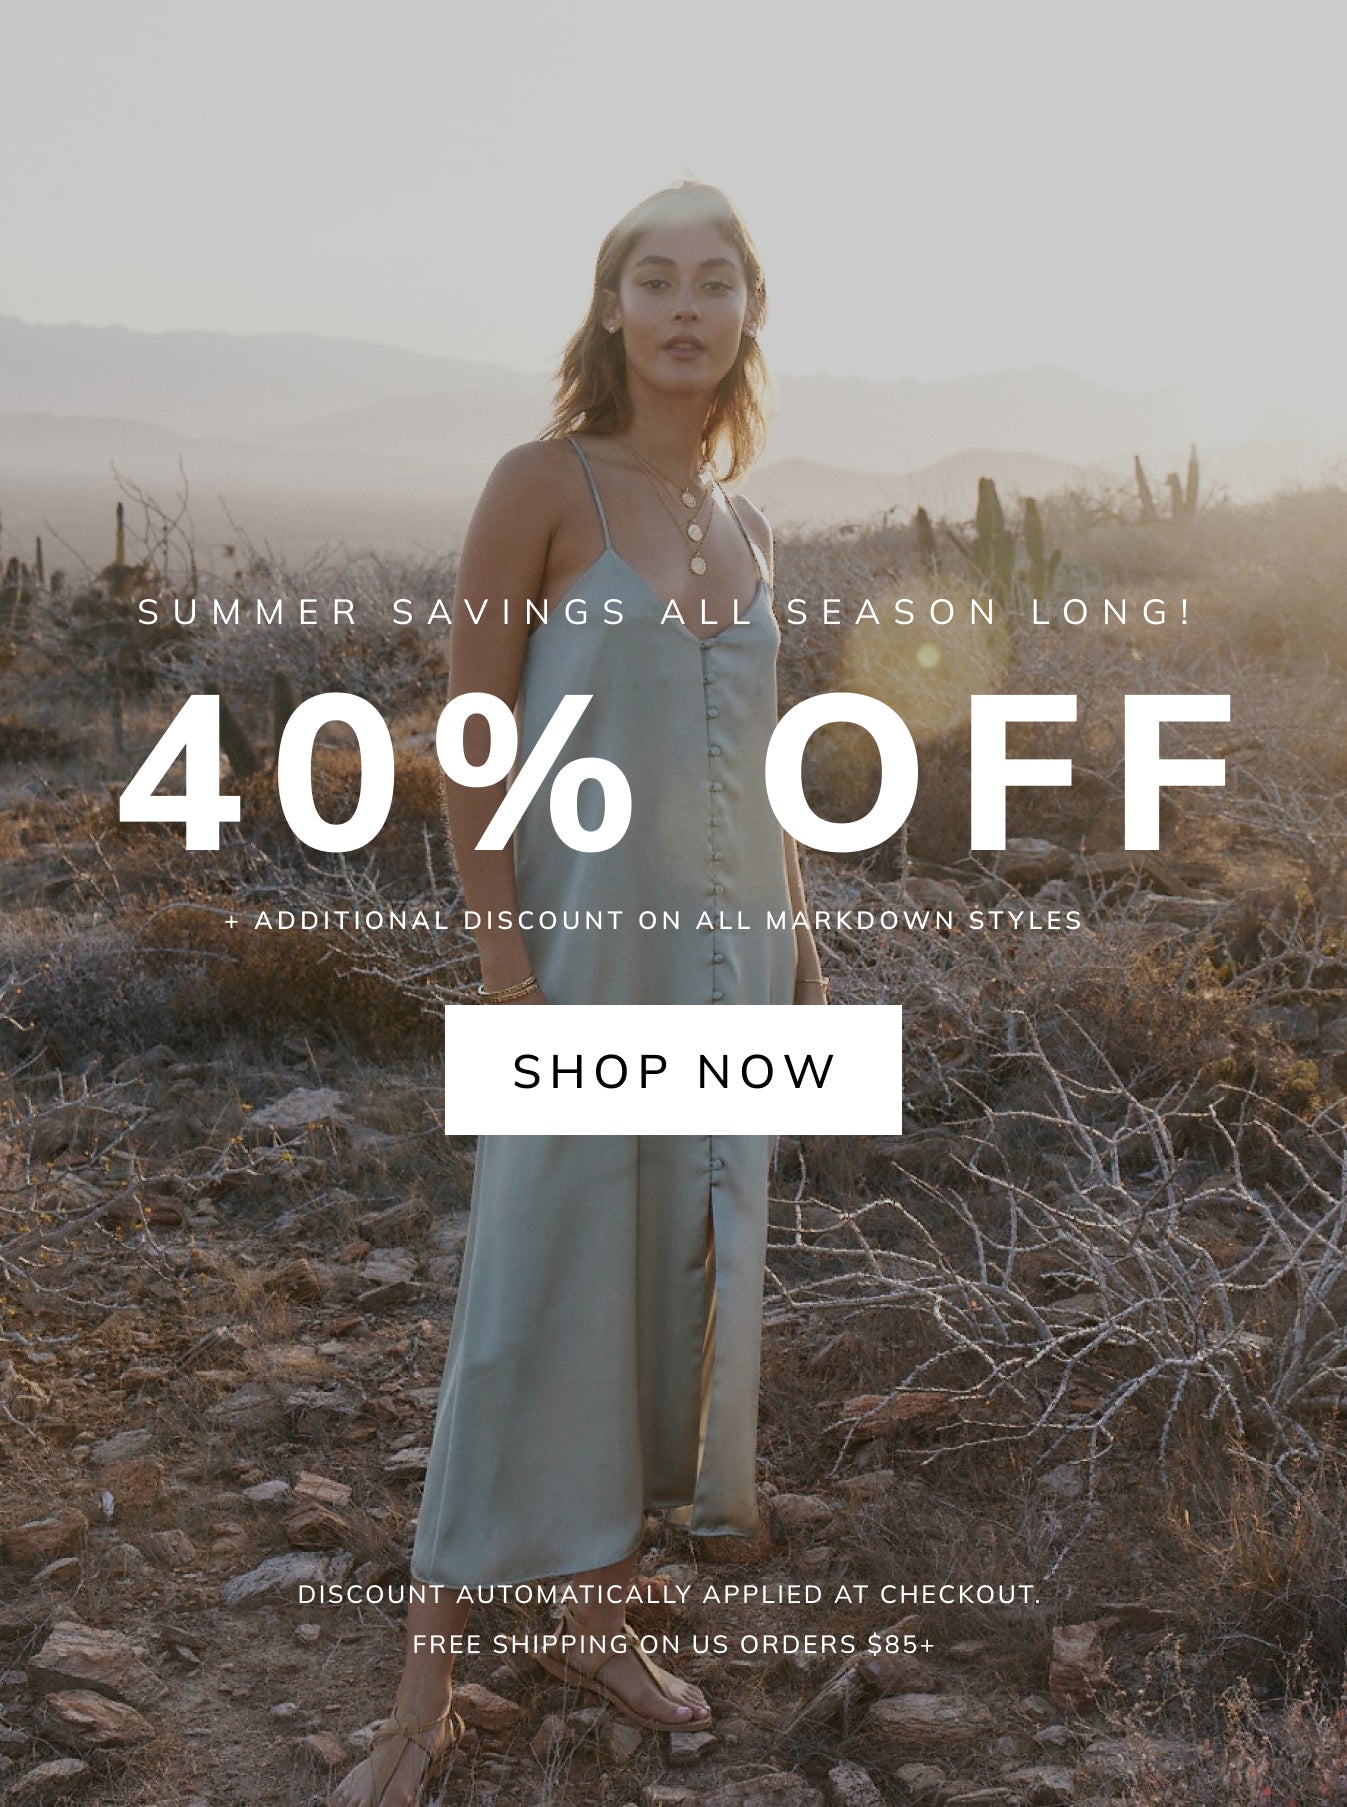 SUMMER SAVINGS ALL SEASON - LONG! 40% OFF + ADDITIONAL DISCOUNT ON ALL MARKDOWN STYLES SHOP NOW DISCOUNT AUTOMATICALLY APPLIED AT CHECKOUT. FREE SHIPPING ON US ORDERS $85+